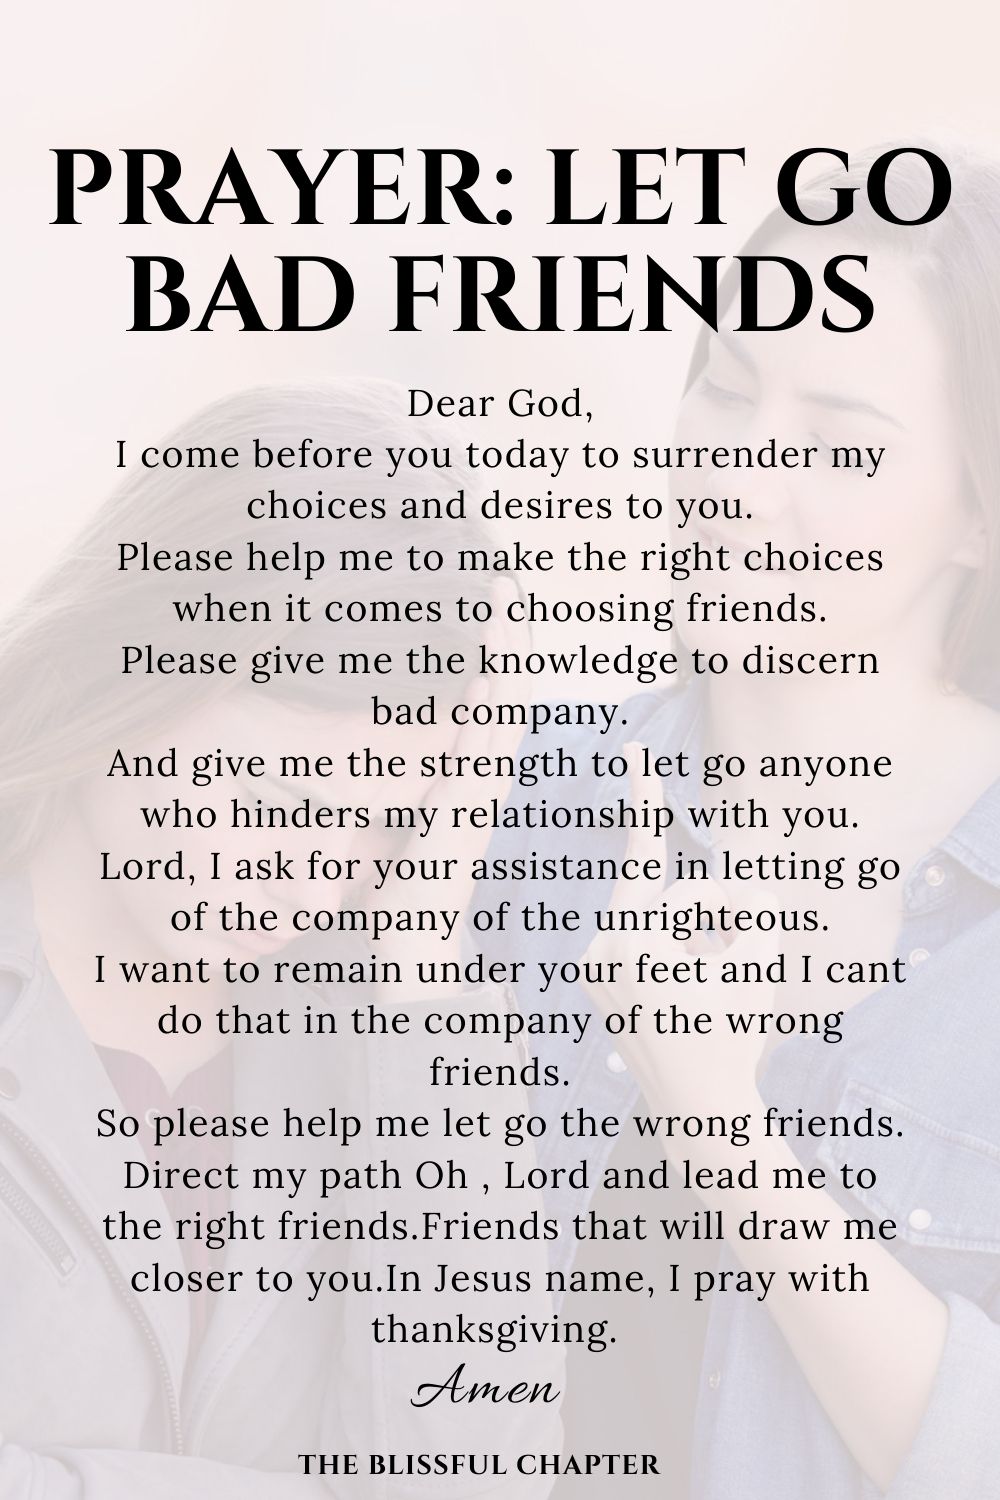 prayer to let go bad friends